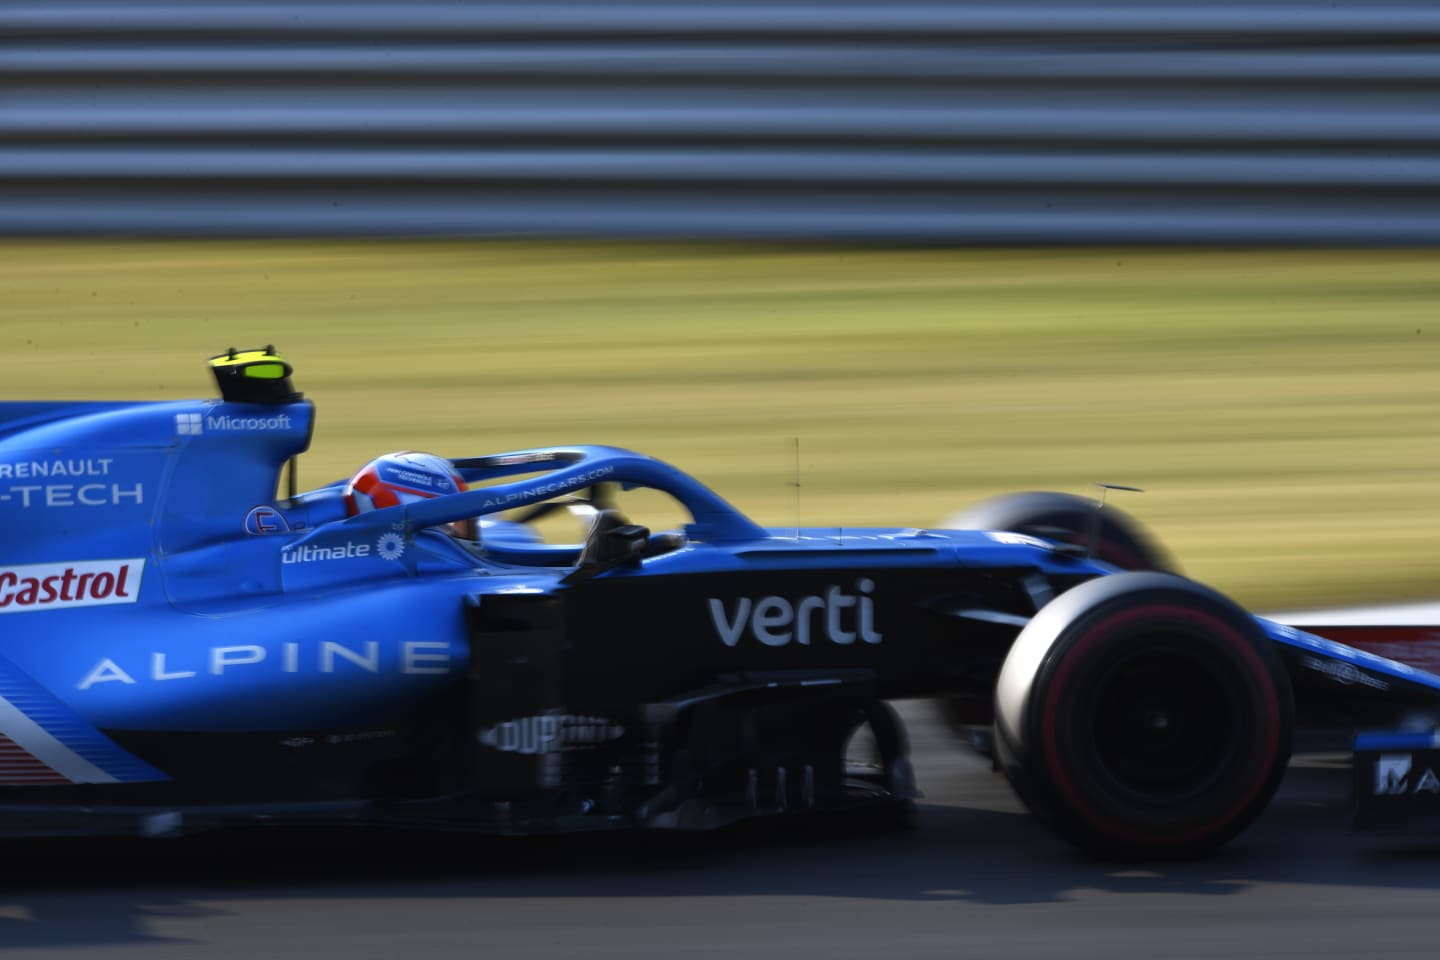 MONZA, ITALY - SEPTEMBER 11: Esteban Ocon of France driving the (31) Alpine A521 Renault during the Sprint ahead of the F1 Grand Prix of Italy at Autodromo di Monza on September 11, 2021 in Monza, Italy. (Photo by Rudy Carezzevoli/Getty Images)